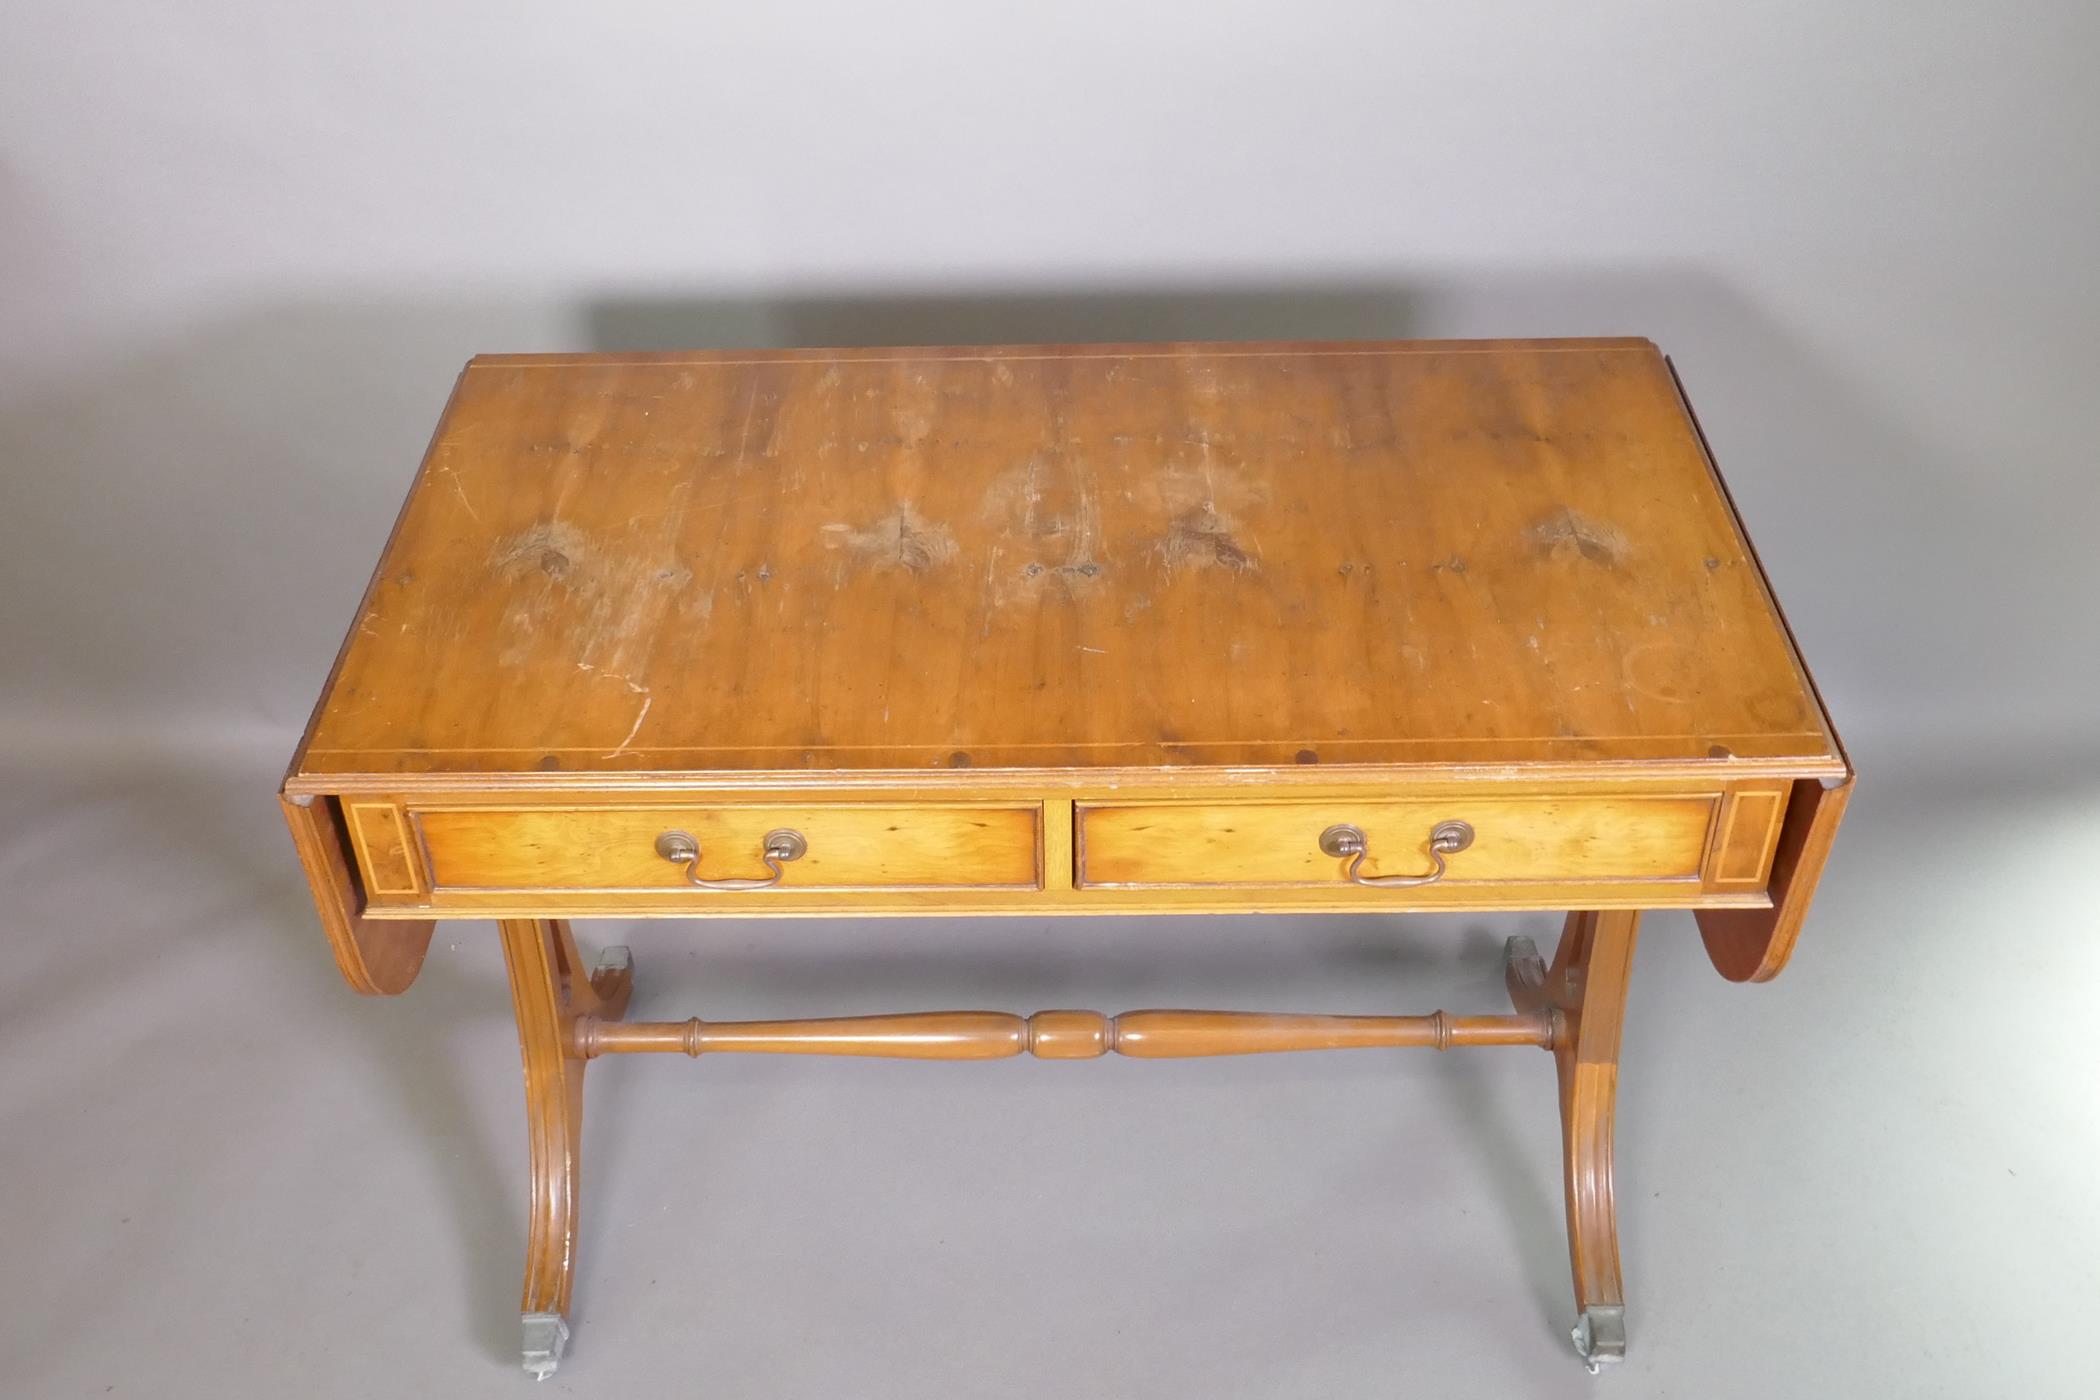 A Regency style yew wood veneered sofa table with two drawers, raised on pierced shaped ends with - Image 3 of 3